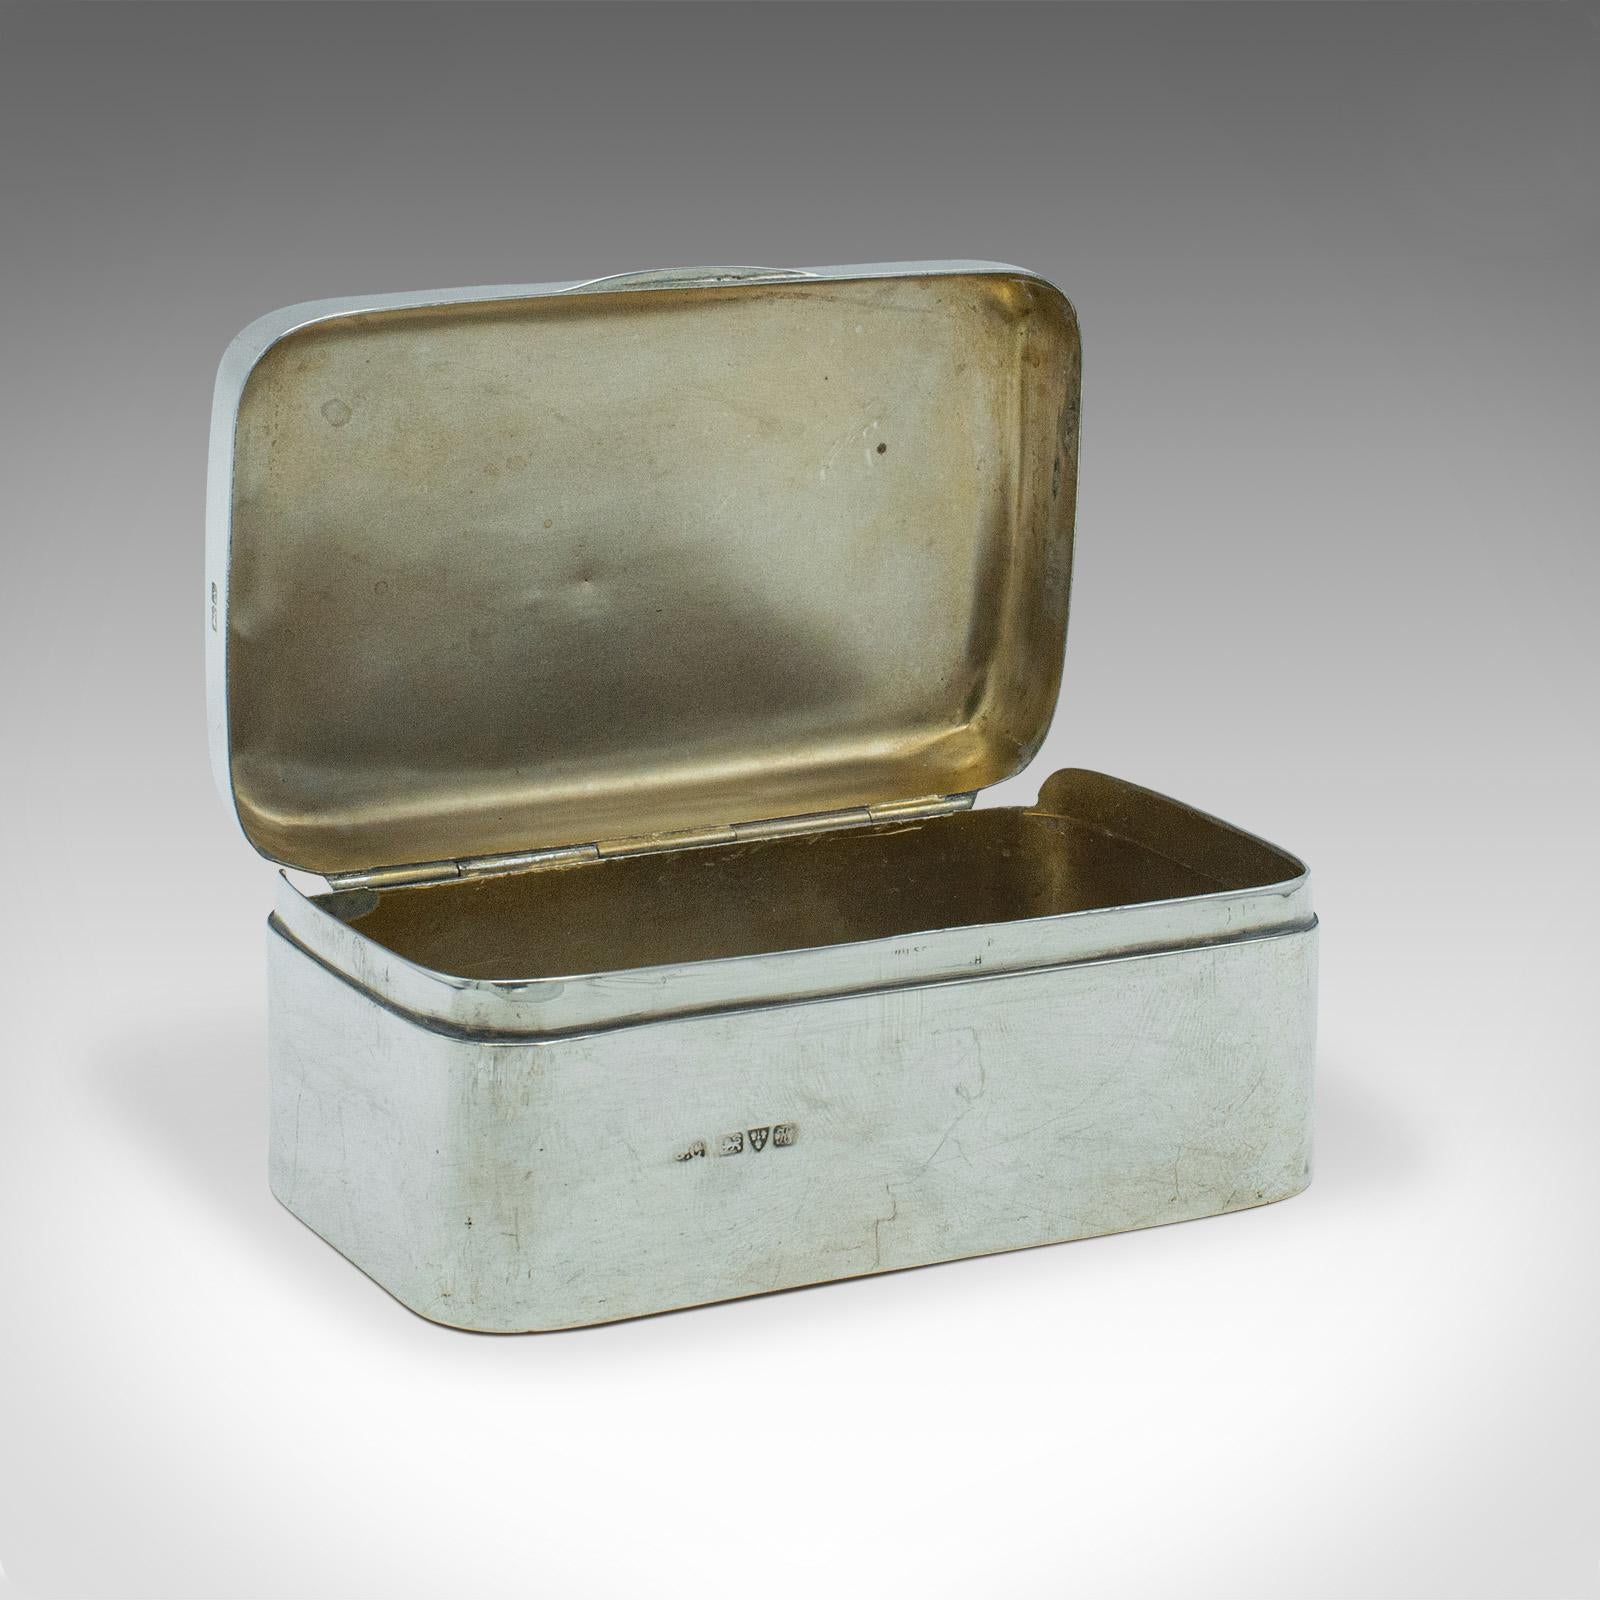 This is an antique gentleman's soap case. An English, sterling silver travelling box with hallmarks, dating to the Edwardian period, circa 1910.

Delightful soap case with a fascinating Edwardian monogram
Displays a desirable aged patina with a